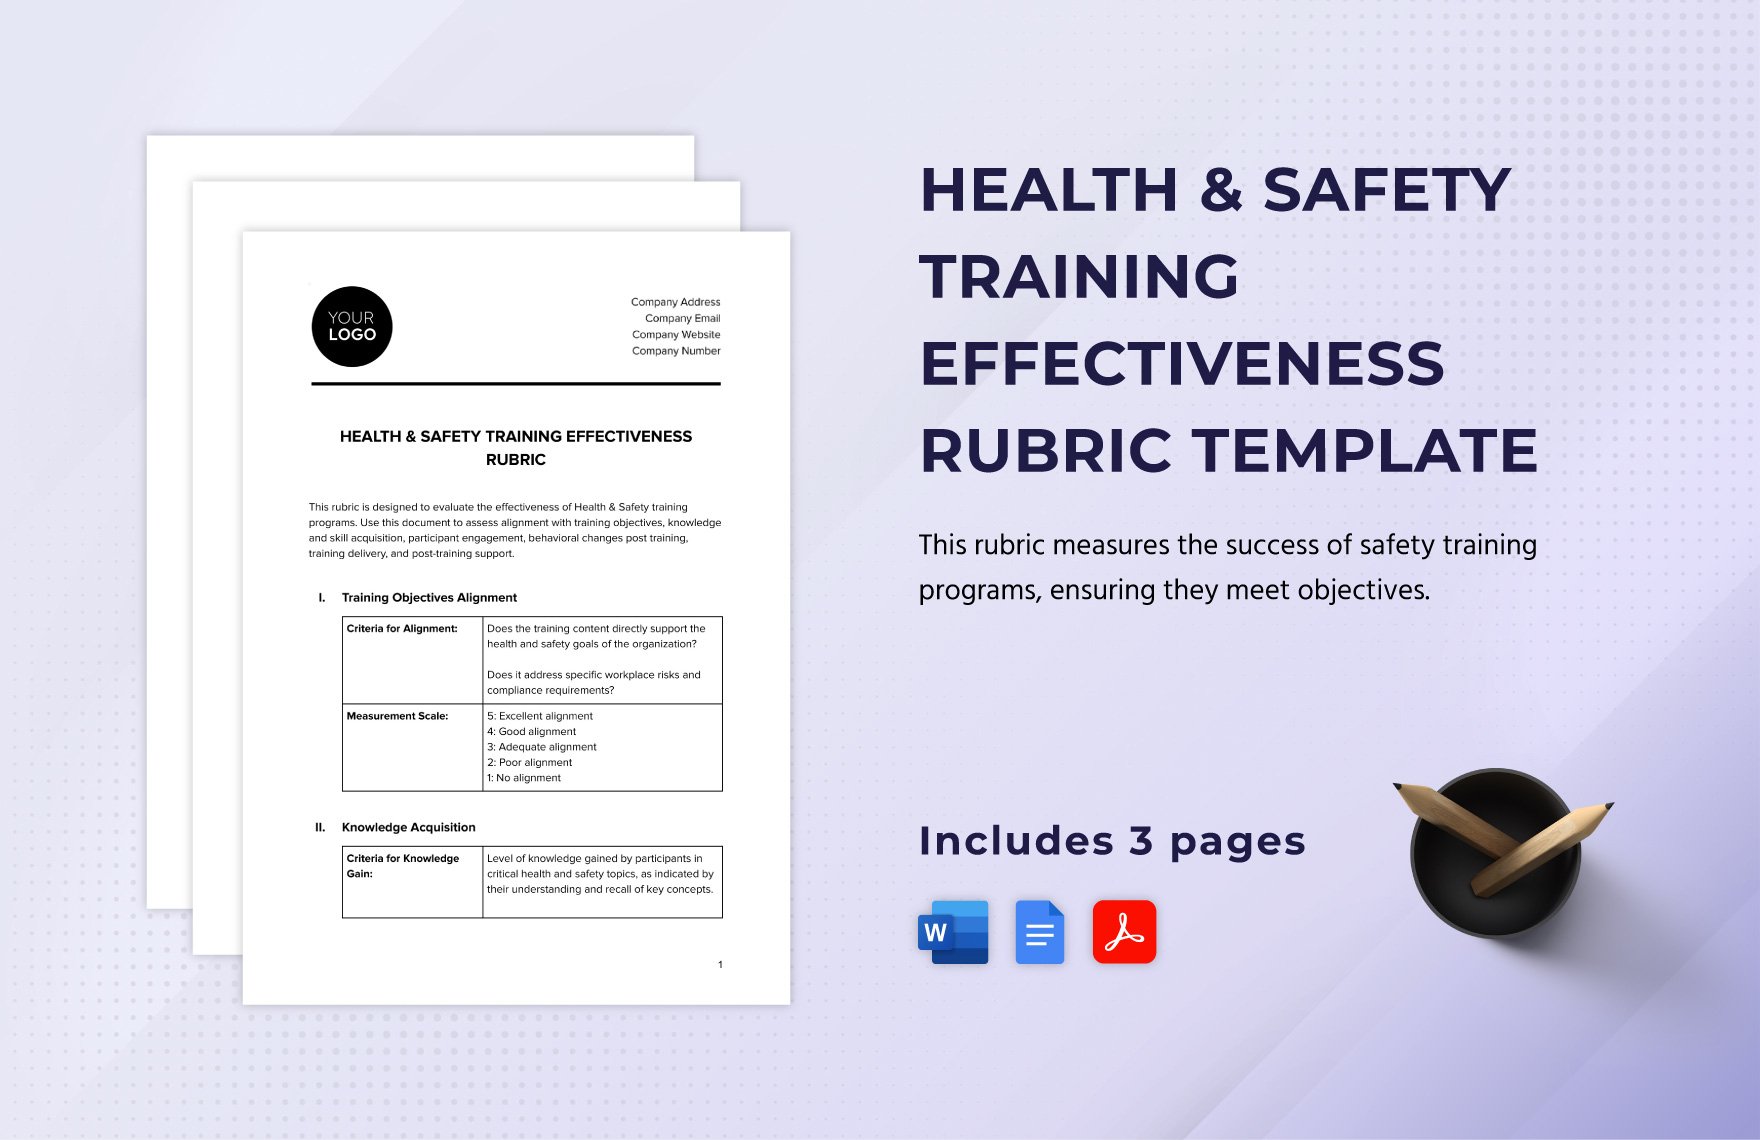 Health & Safety Training Effectiveness Rubric Template